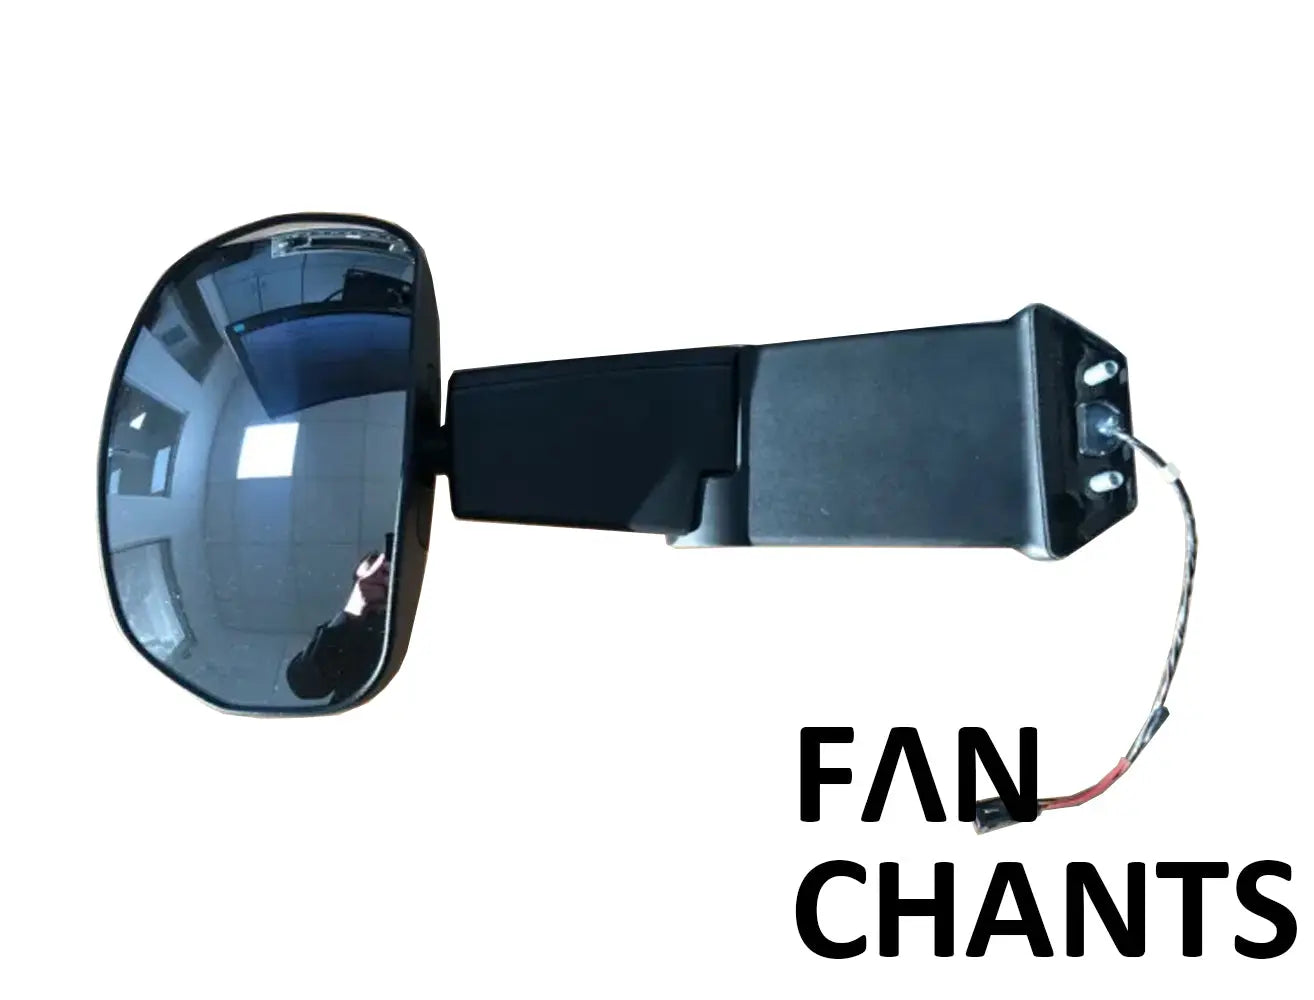 CHINA Factory Wholesale 5802450959 FRONT MIRROR FOR IVECO FANCHANTS China Auto Parts Wholesales